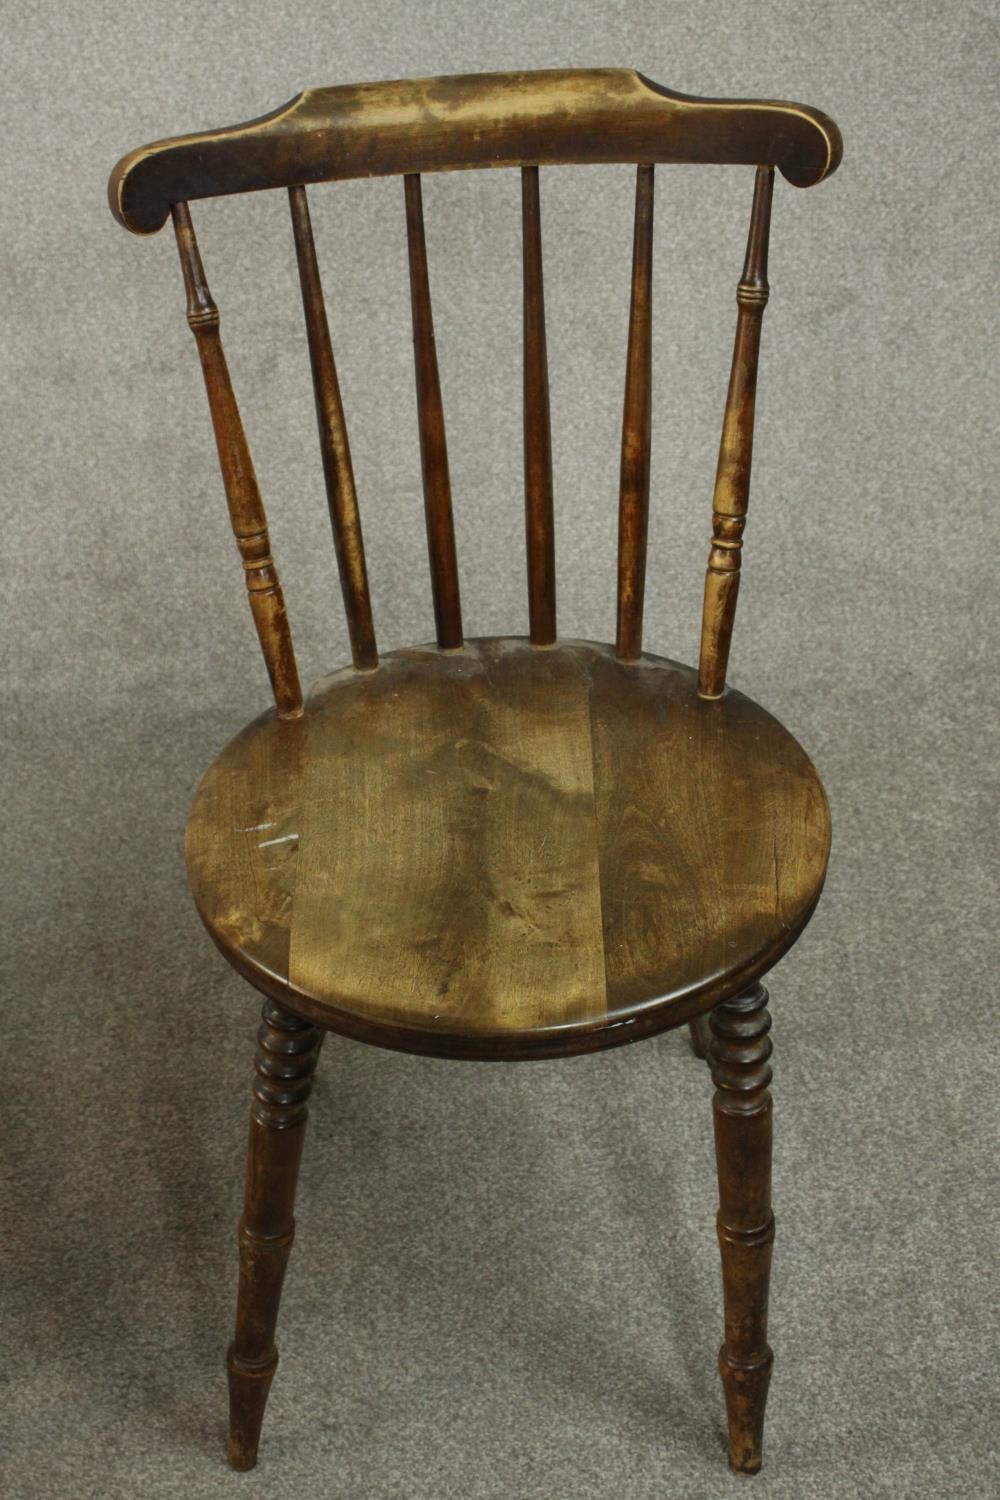 A miscellaneous collection of three 19th century side chairs. - Image 3 of 10